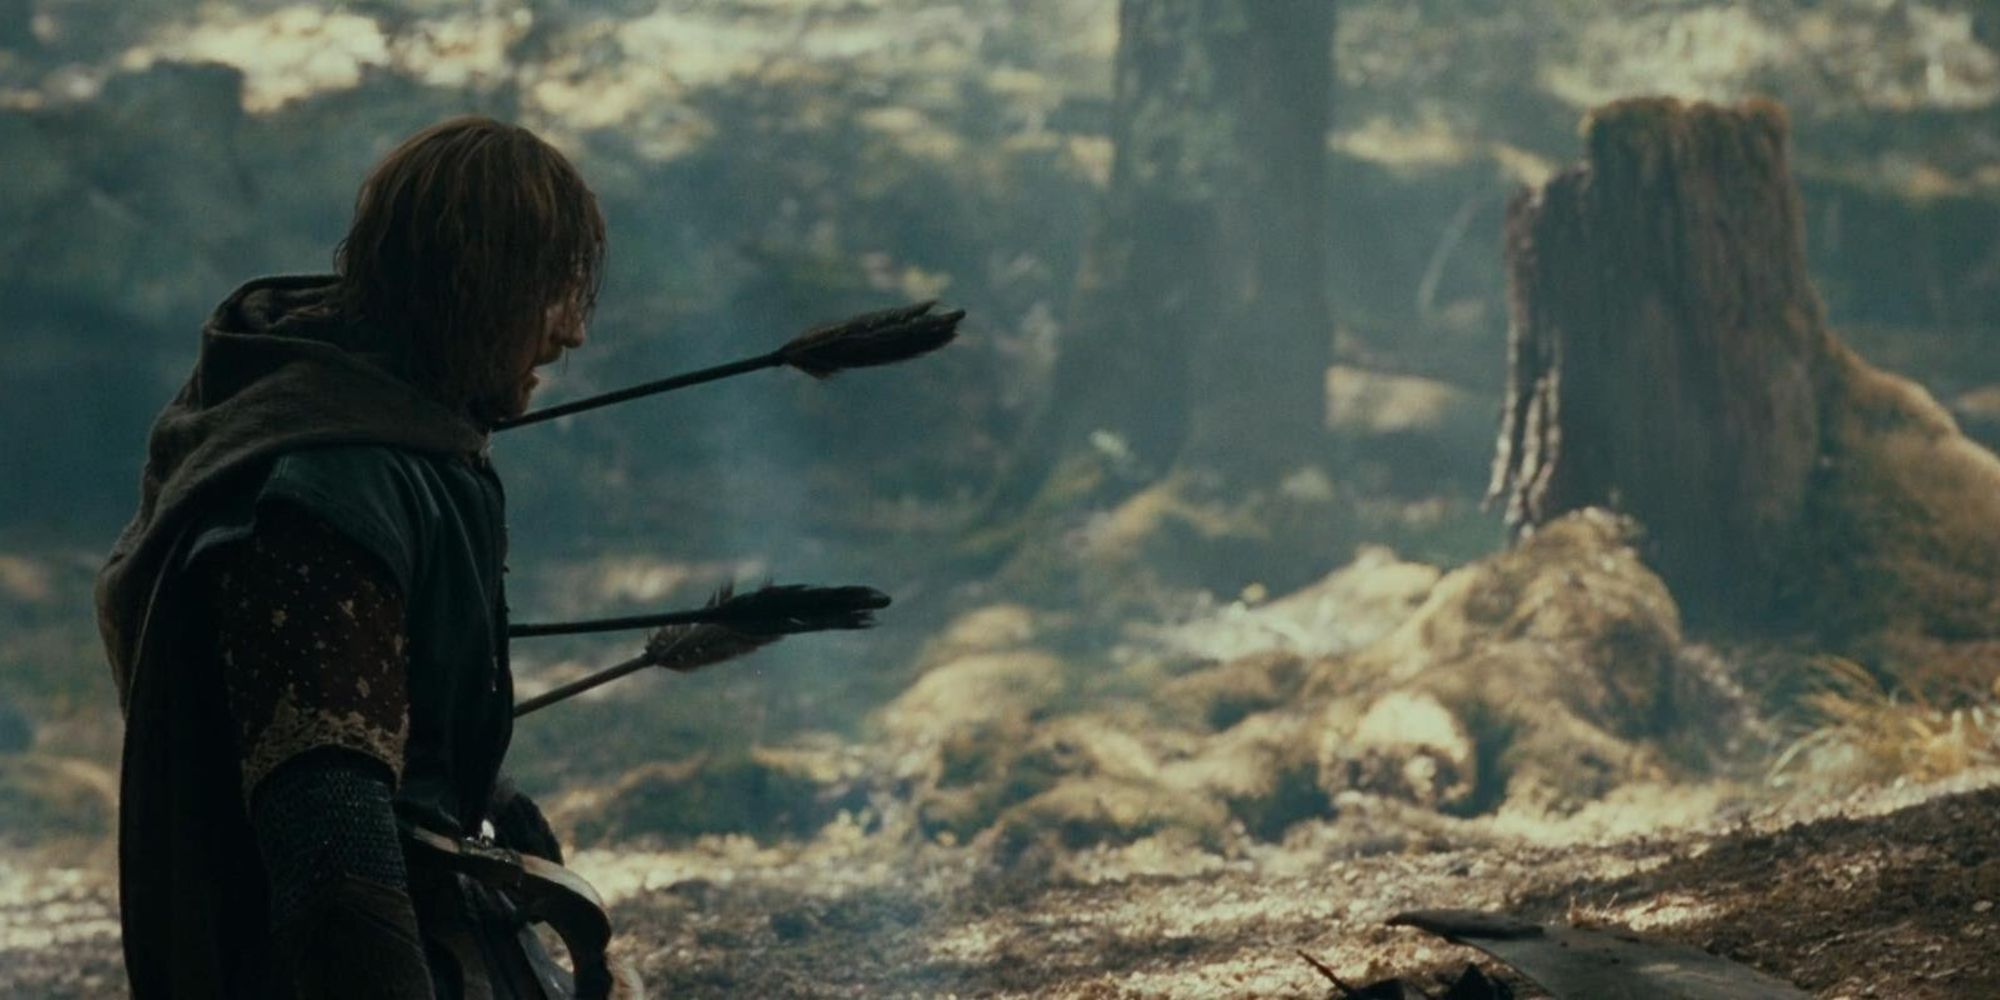 boromir's death in the fellowship of the ring